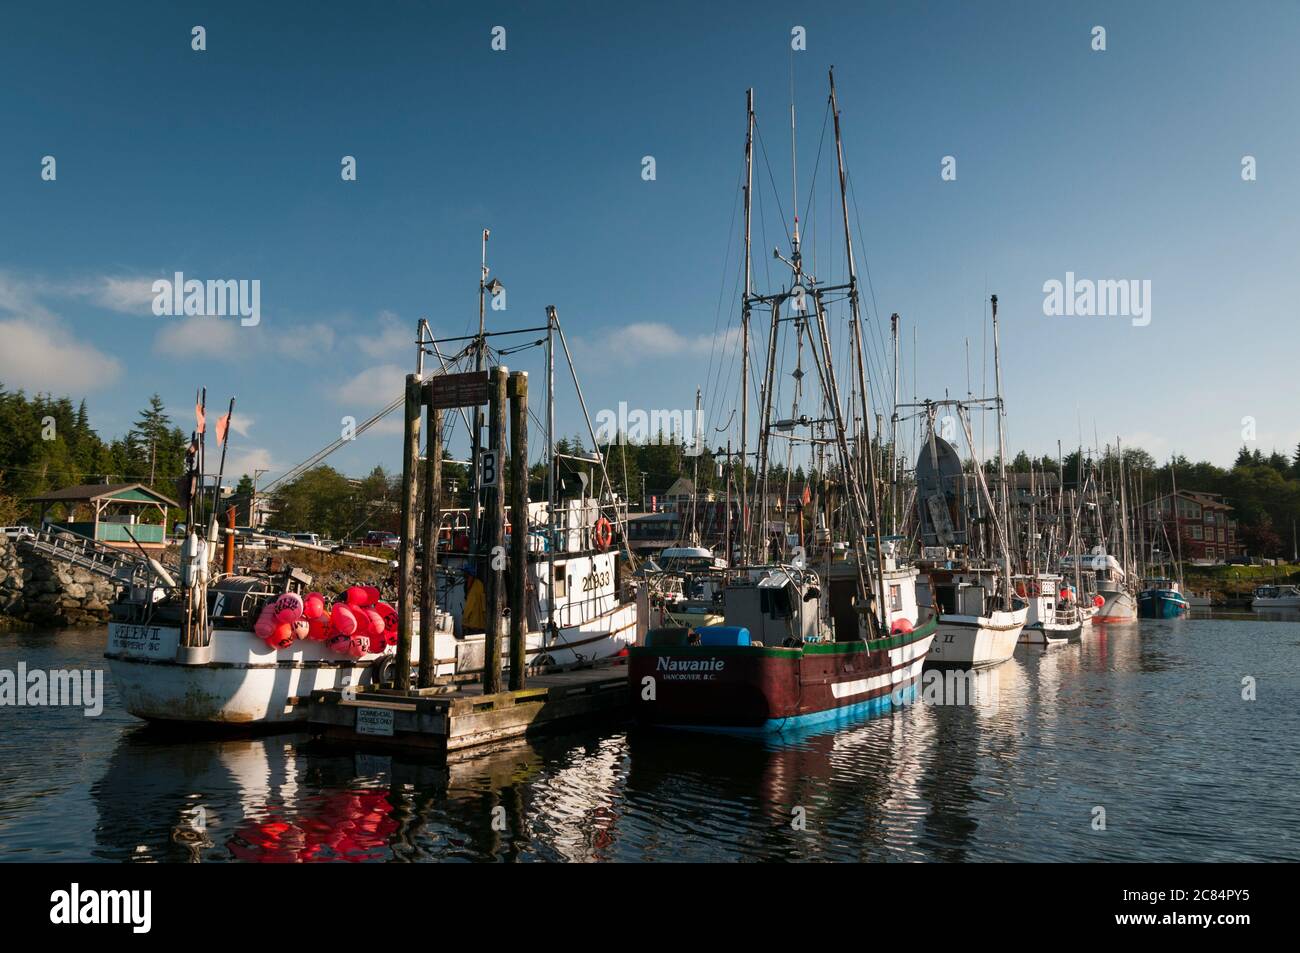 Fishing boats moored in Ucluelet Harbour, Vancouver Island, British Columbia, Canada. Stock Photo